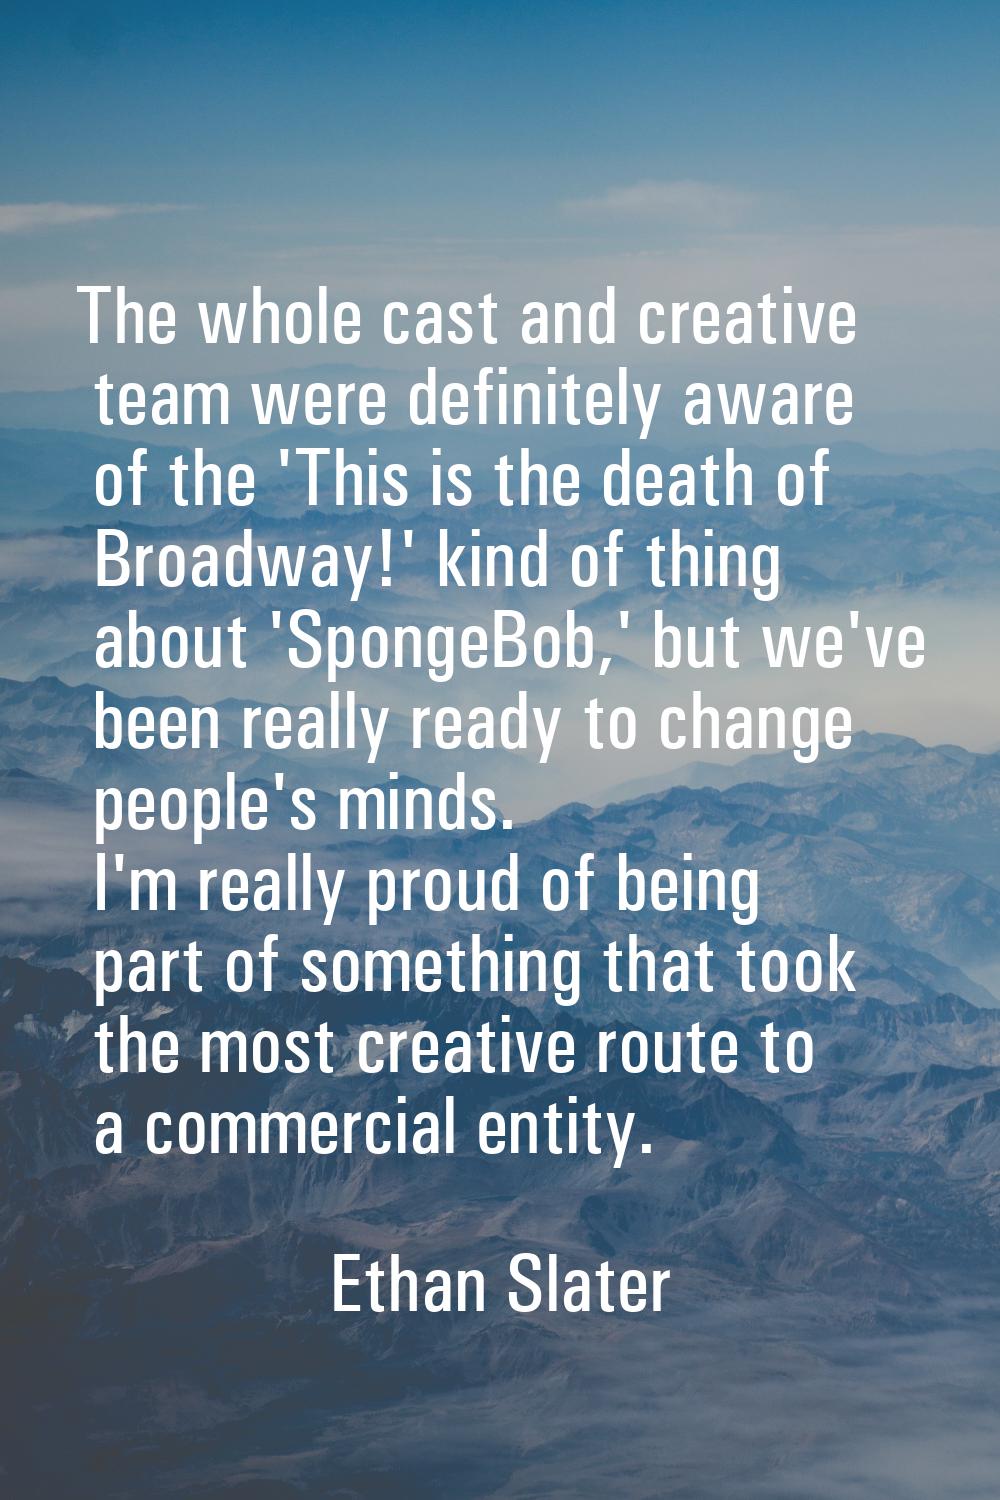 The whole cast and creative team were definitely aware of the 'This is the death of Broadway!' kind